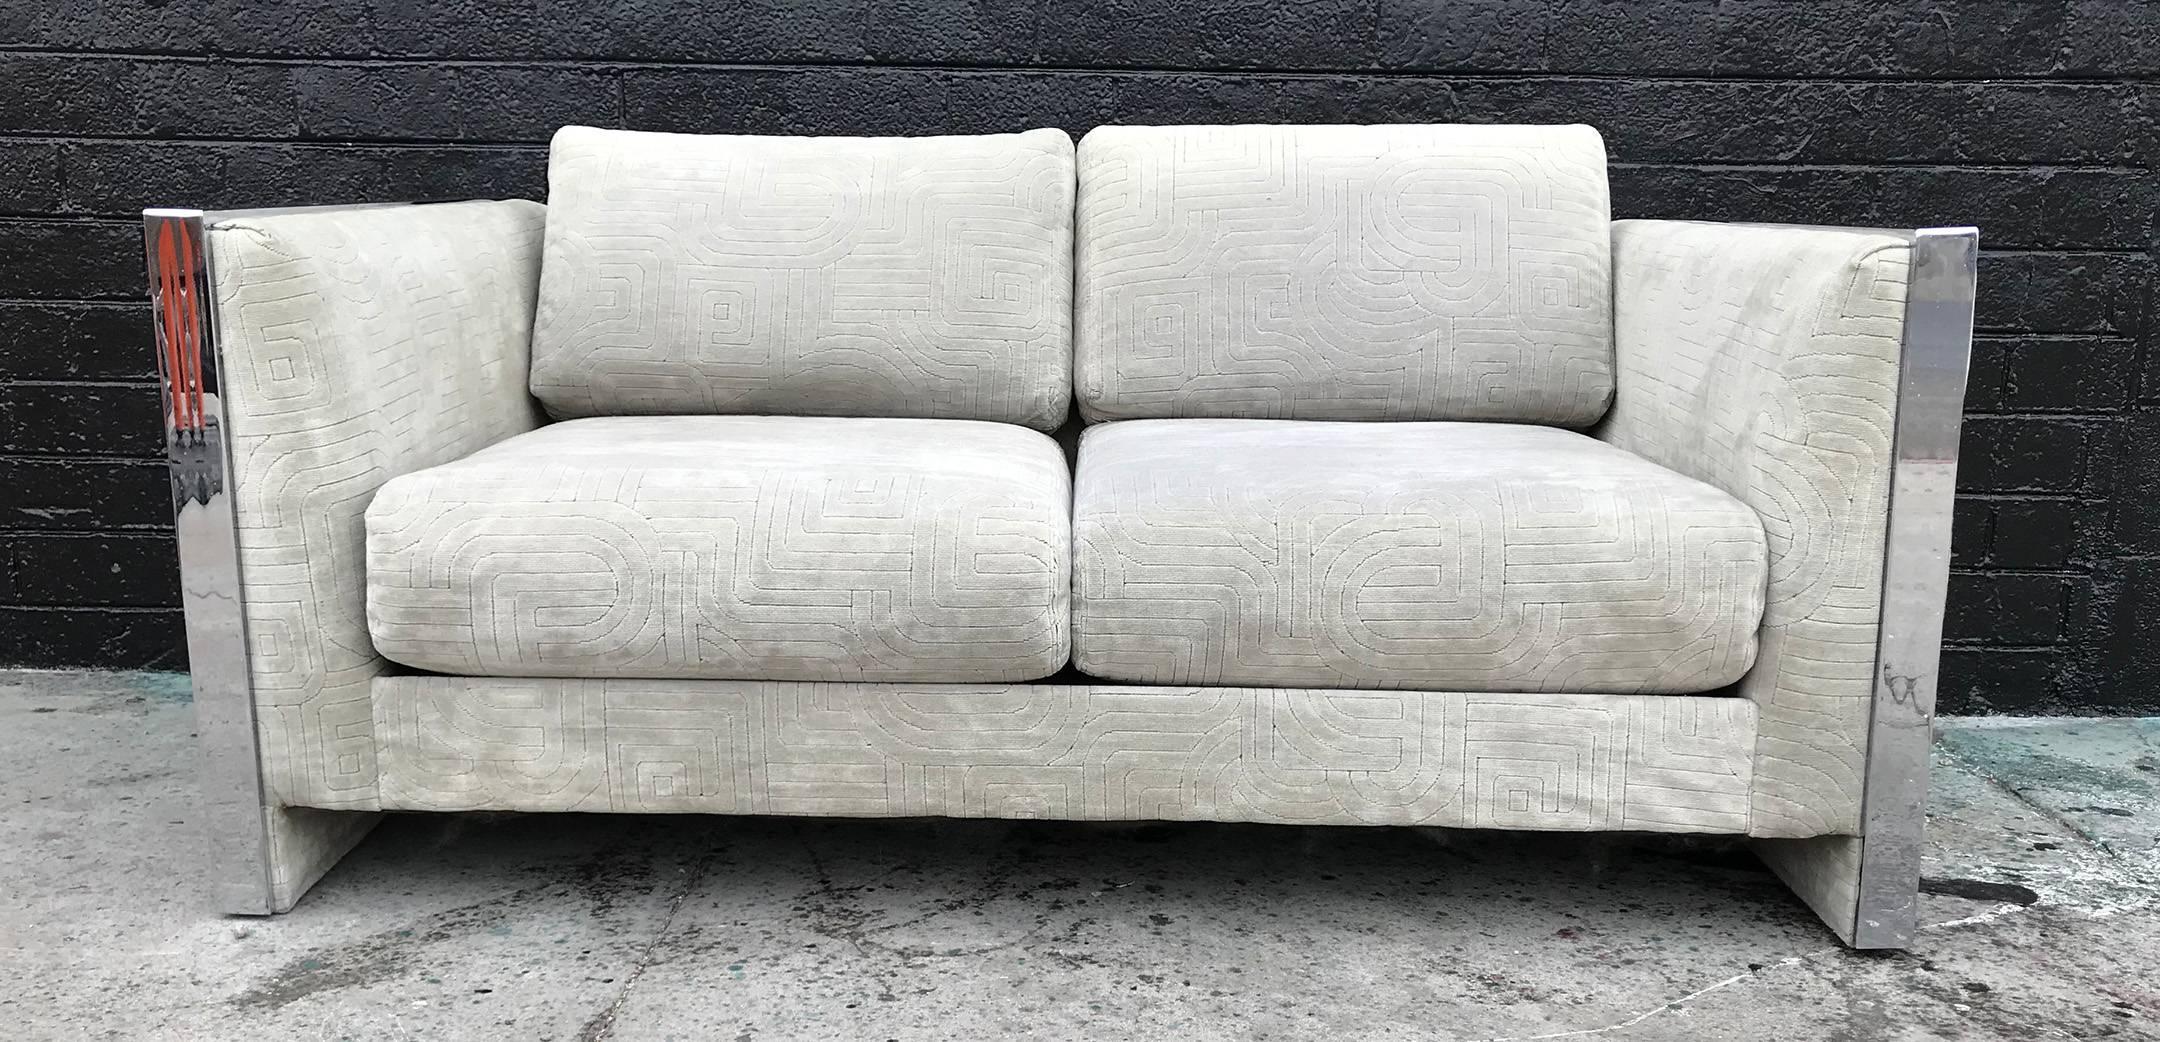 A gorgeous sofa by Selig Monroe. This 1970s sofa features chrome accented sides, and a bold tone on tone geometric patterned light grey velvet upholstery.